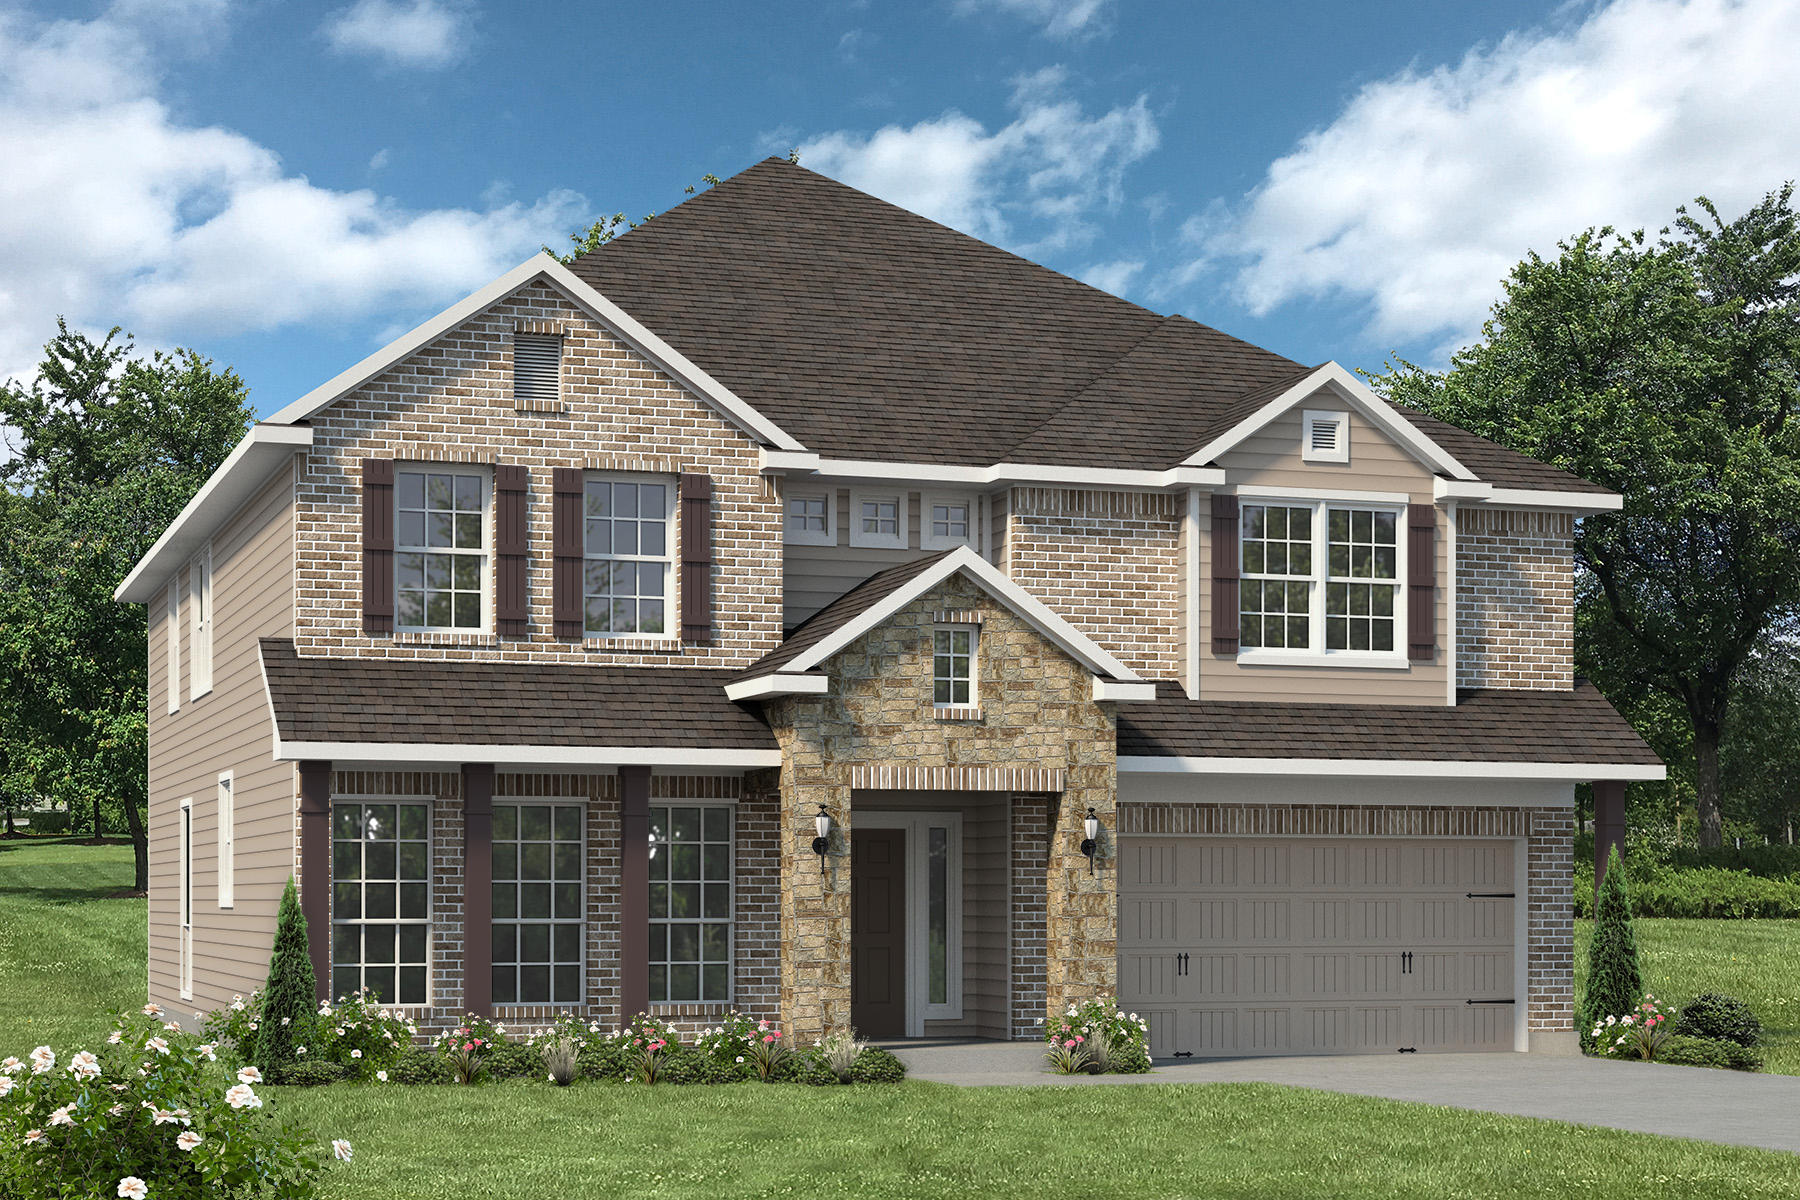 https://myhome.anewgo.com/client/stylecraft/community/Our%20Plans/plan/3268?elevId=49. 3,290sf New Home in Copperas Cove, TX